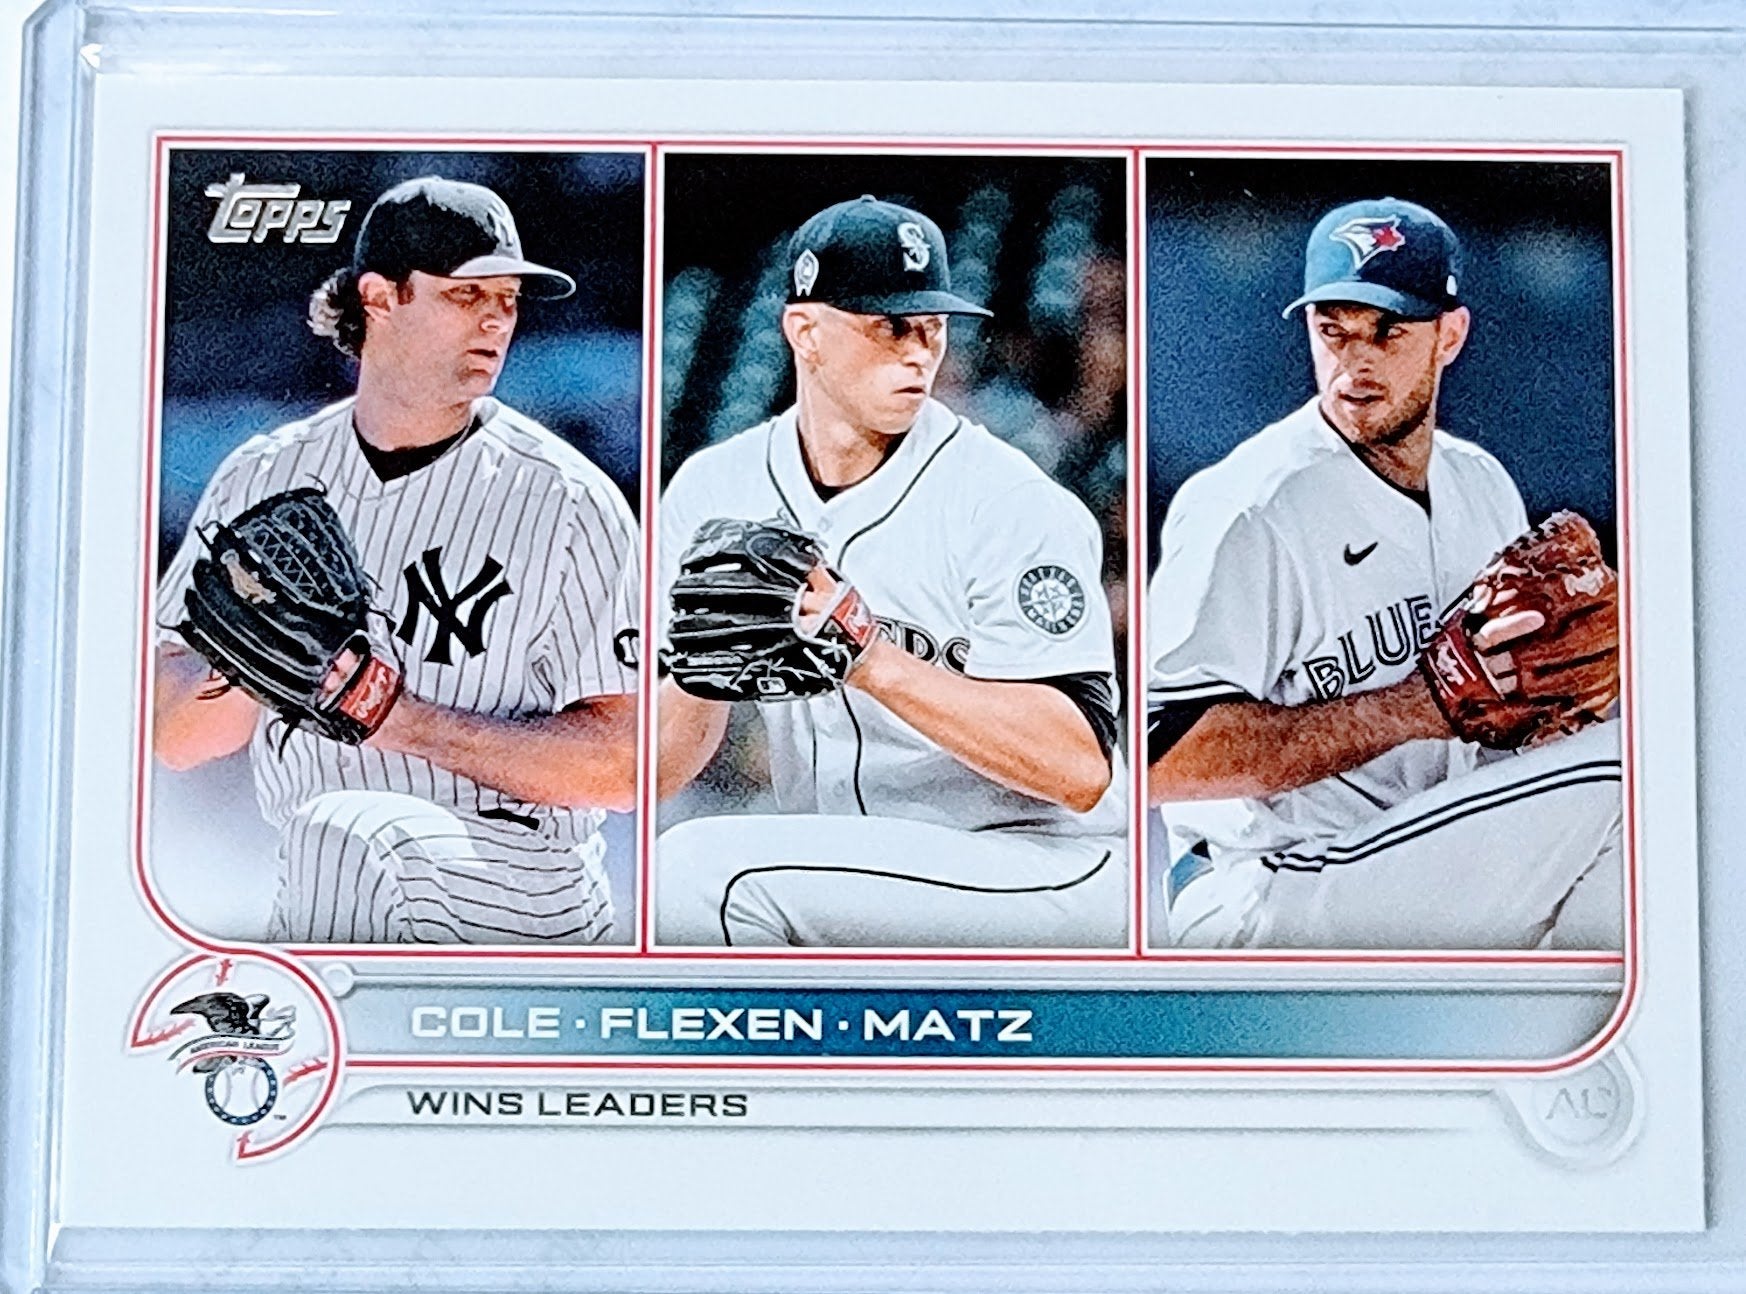 2022 Topps Wins Leaders Cole, Flexen & Matz Baseball Trading Card GRB1 simple Xclusive Collectibles   